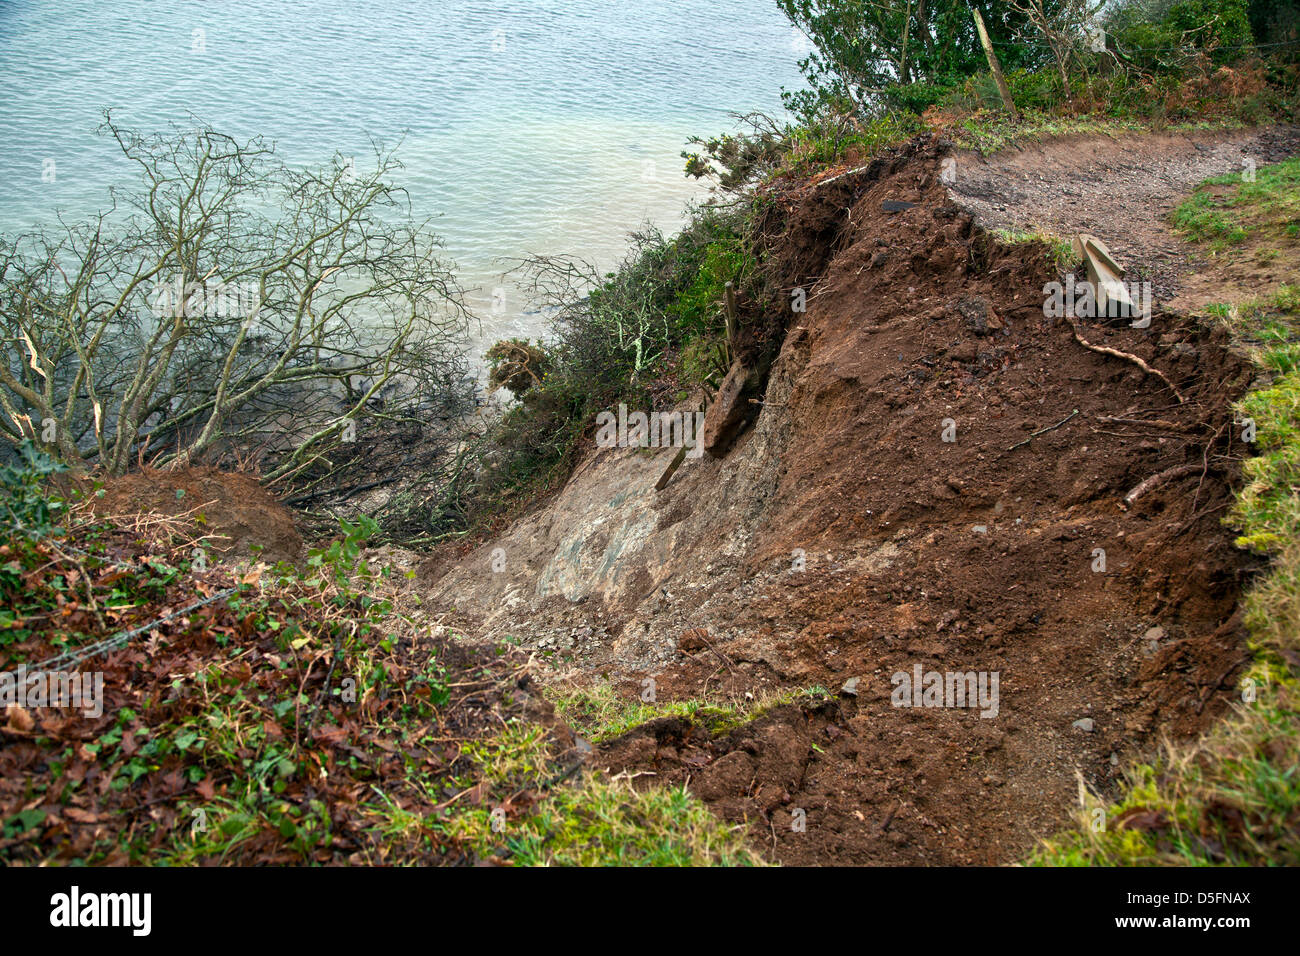 collapsed section of a coastal erosion after rain damage with fallen trees and mud Cornish coastal path, Helston River Cornwall England UK Stock Photo